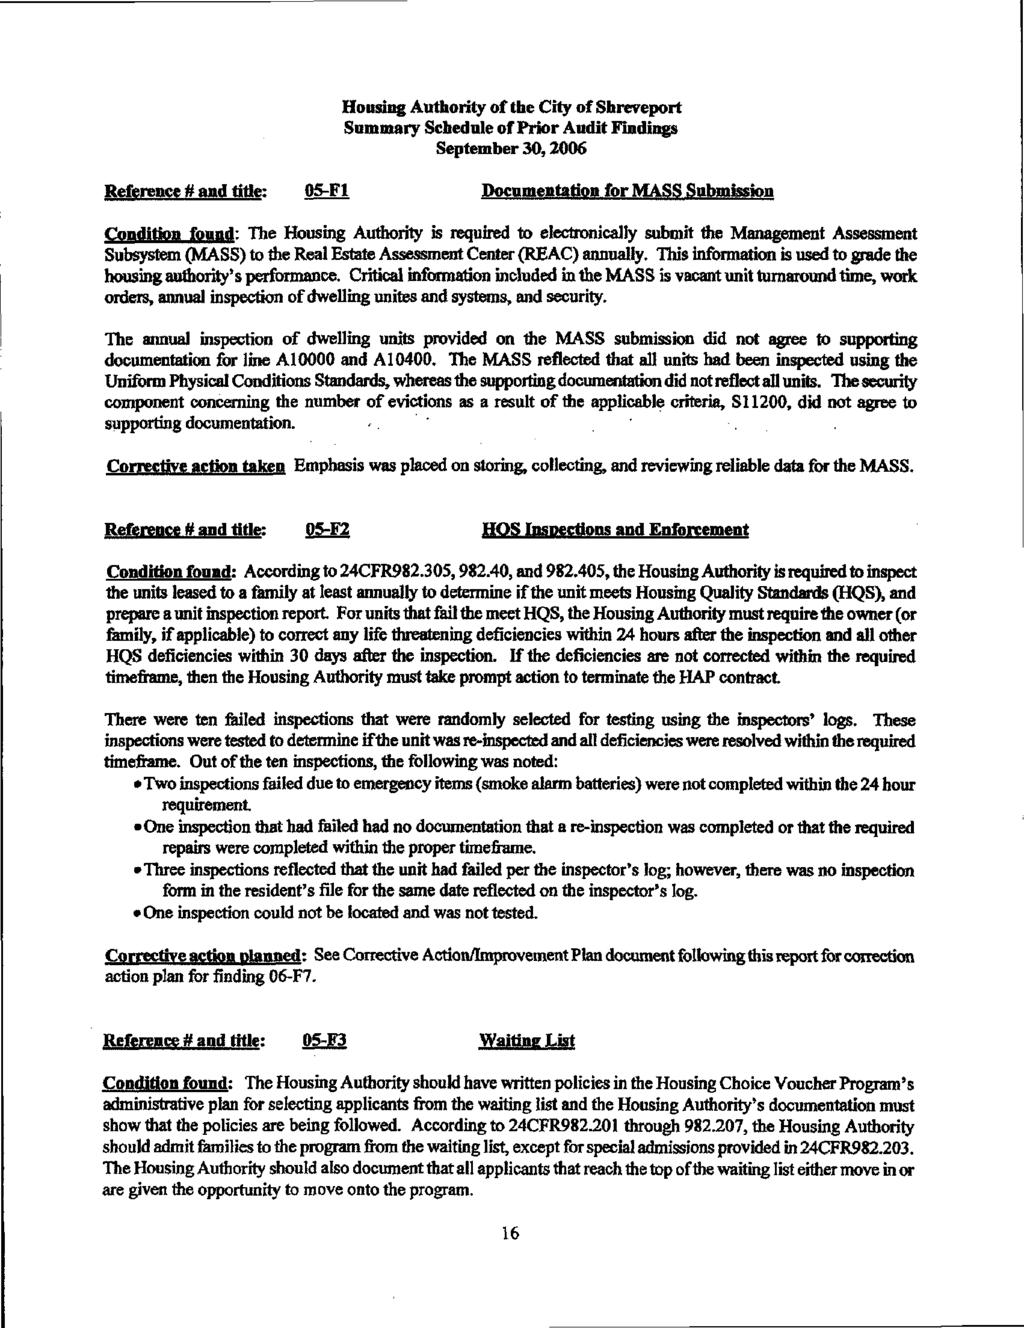 Housing Authority of the City of Shreveport Summary Schedule of Prior Audit Findings September 3,26 Reference # and title: 5-F1 Documentation for MASS Submission Condition found: The Housing